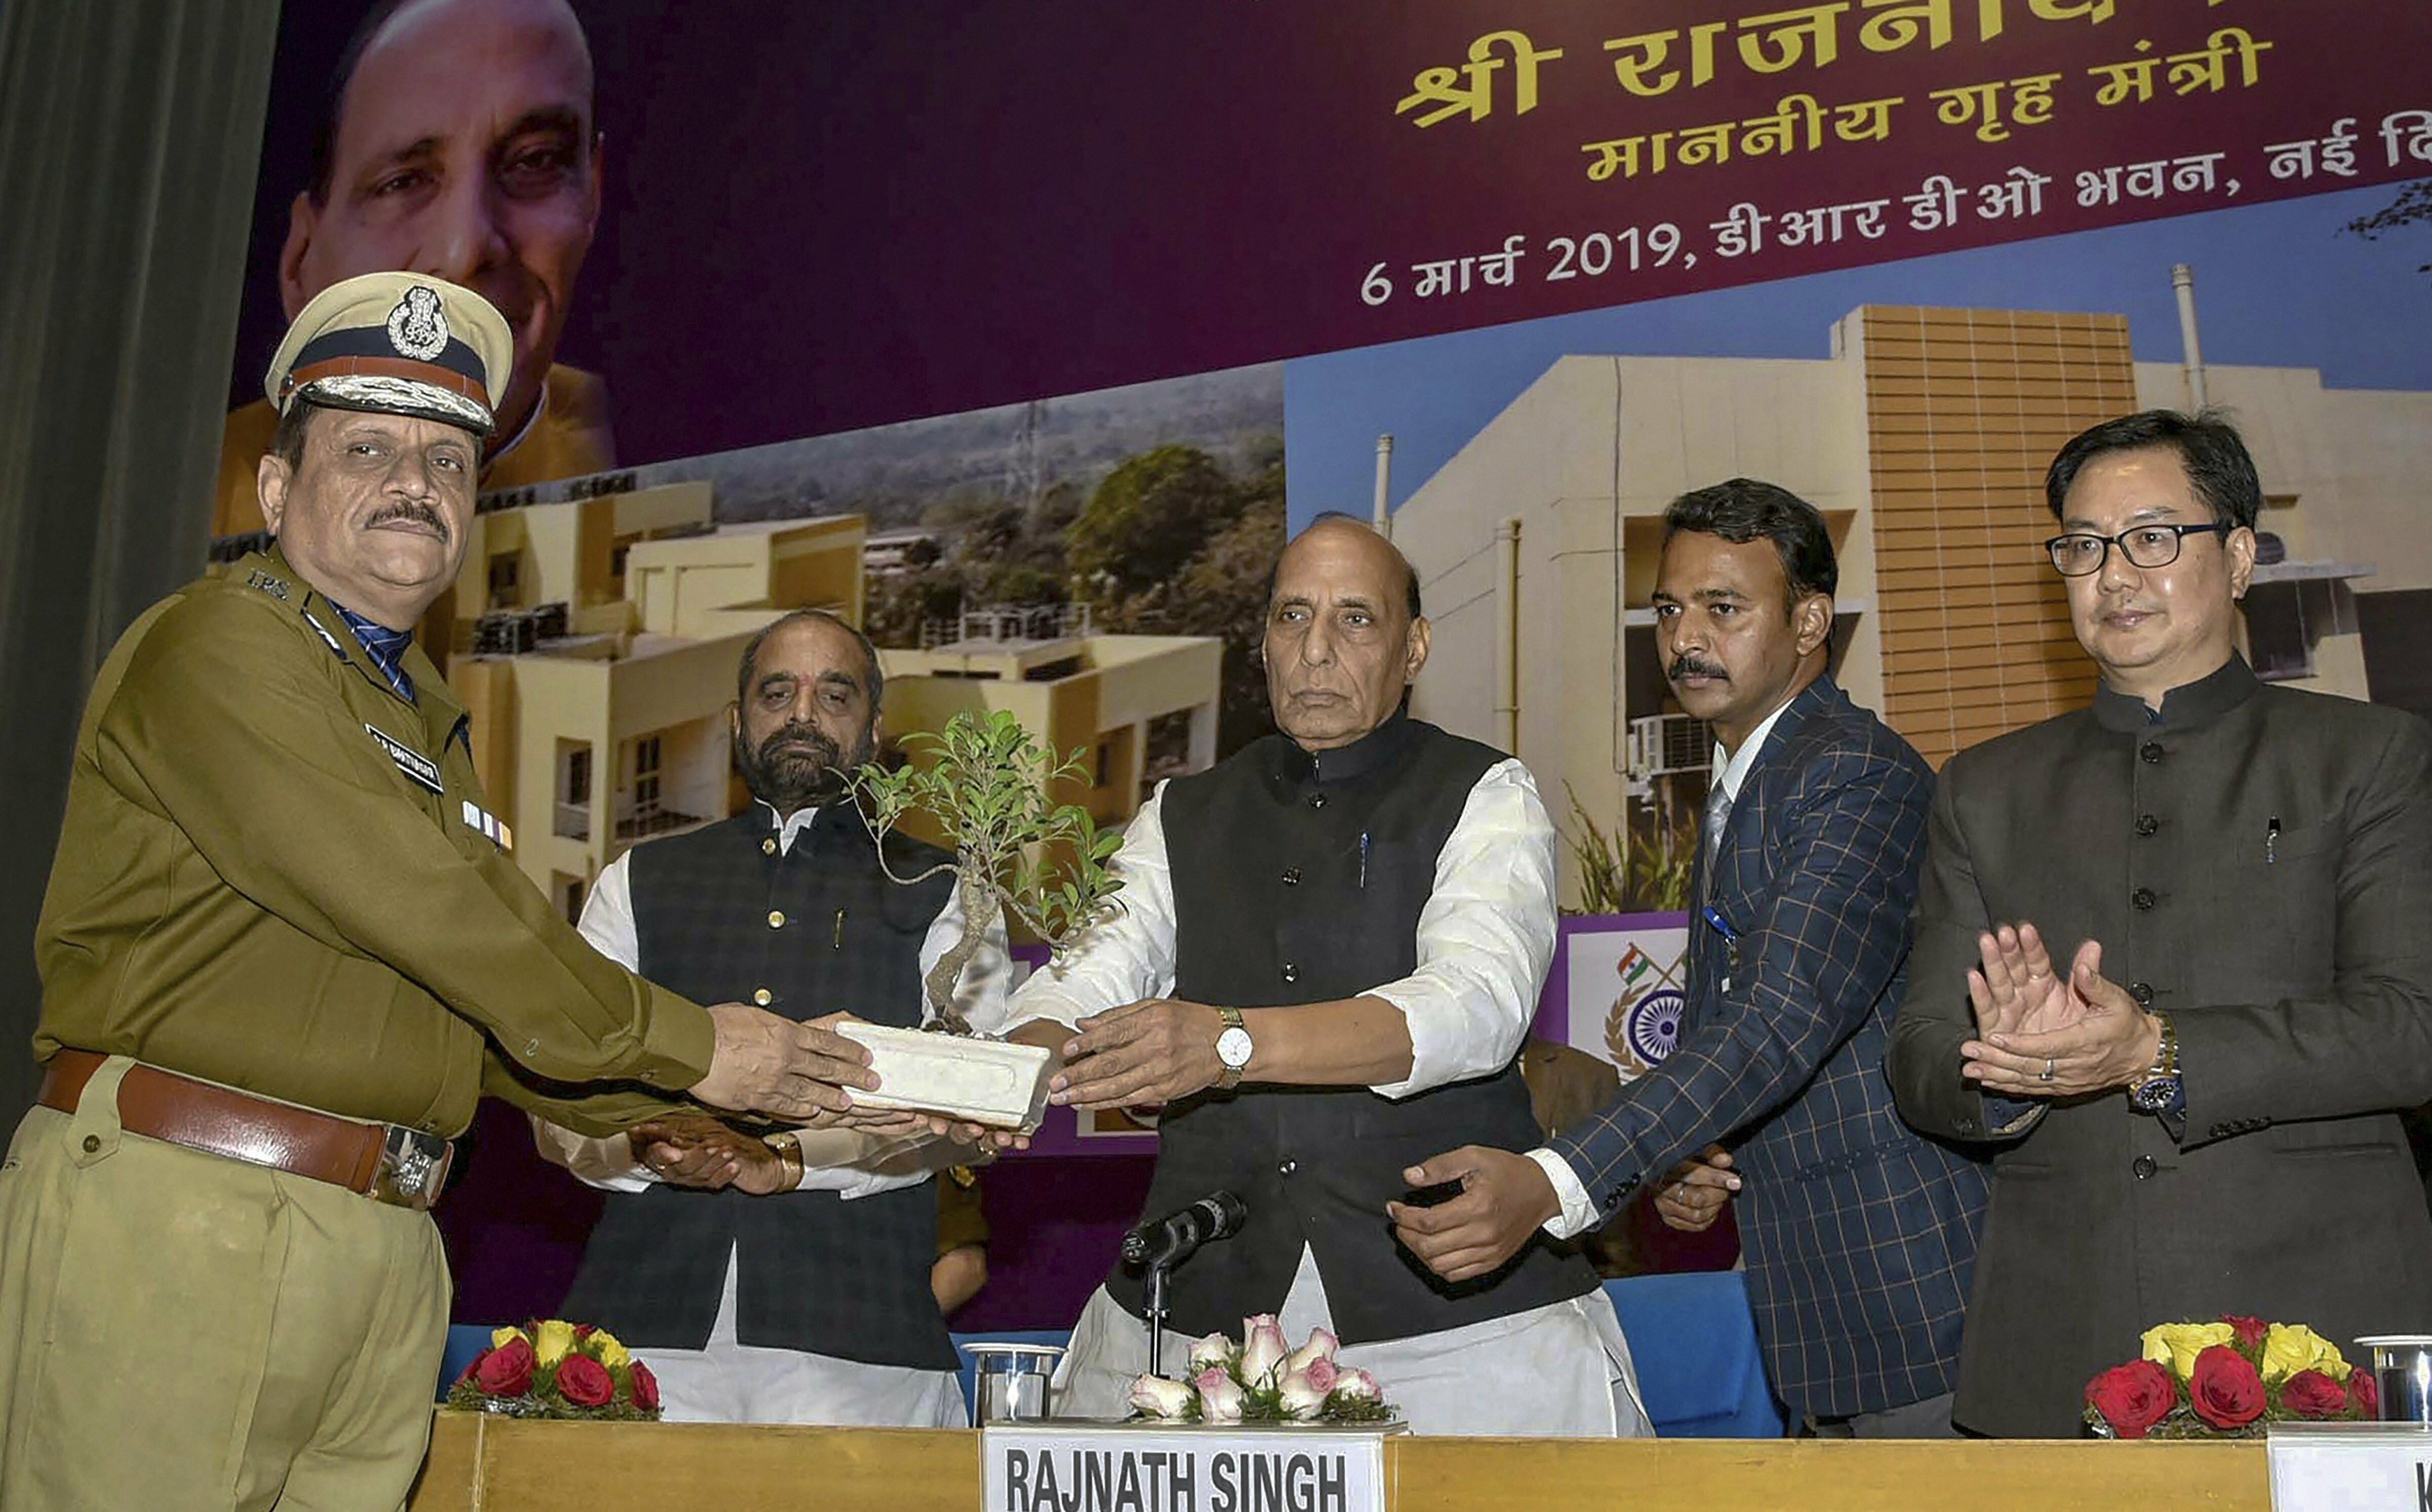 Union Home Minister Rajnath Singh is greeted by Director General of the CRPF, Rajeev Rai Bhatnagar, during the inauguration and foundation stone laying ceremony of various residential and office buildings of CAPFs, CPOs and Delhi Police, in New Delhi - PTI